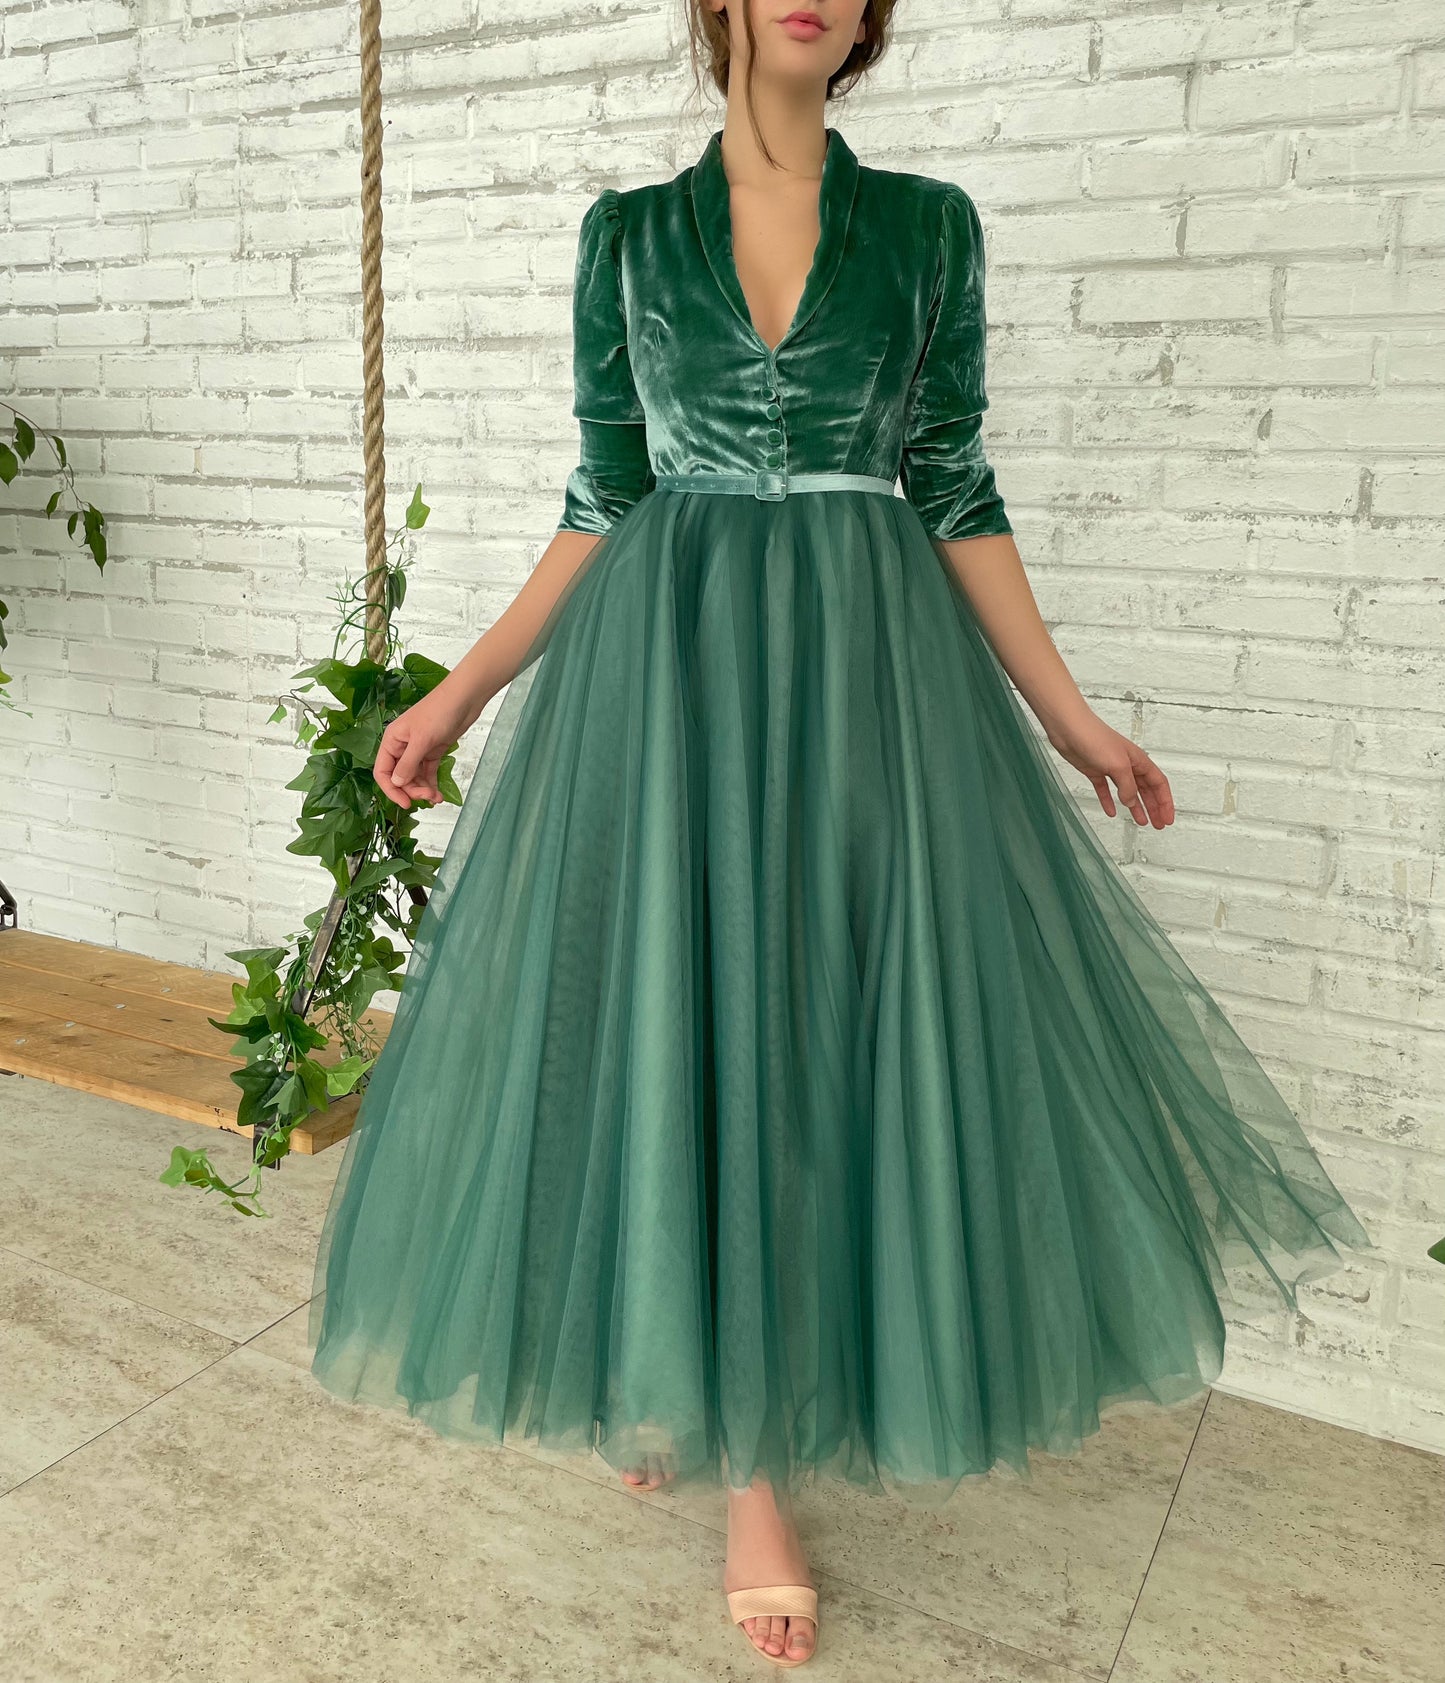 Green midi dress with belt and long sleeves